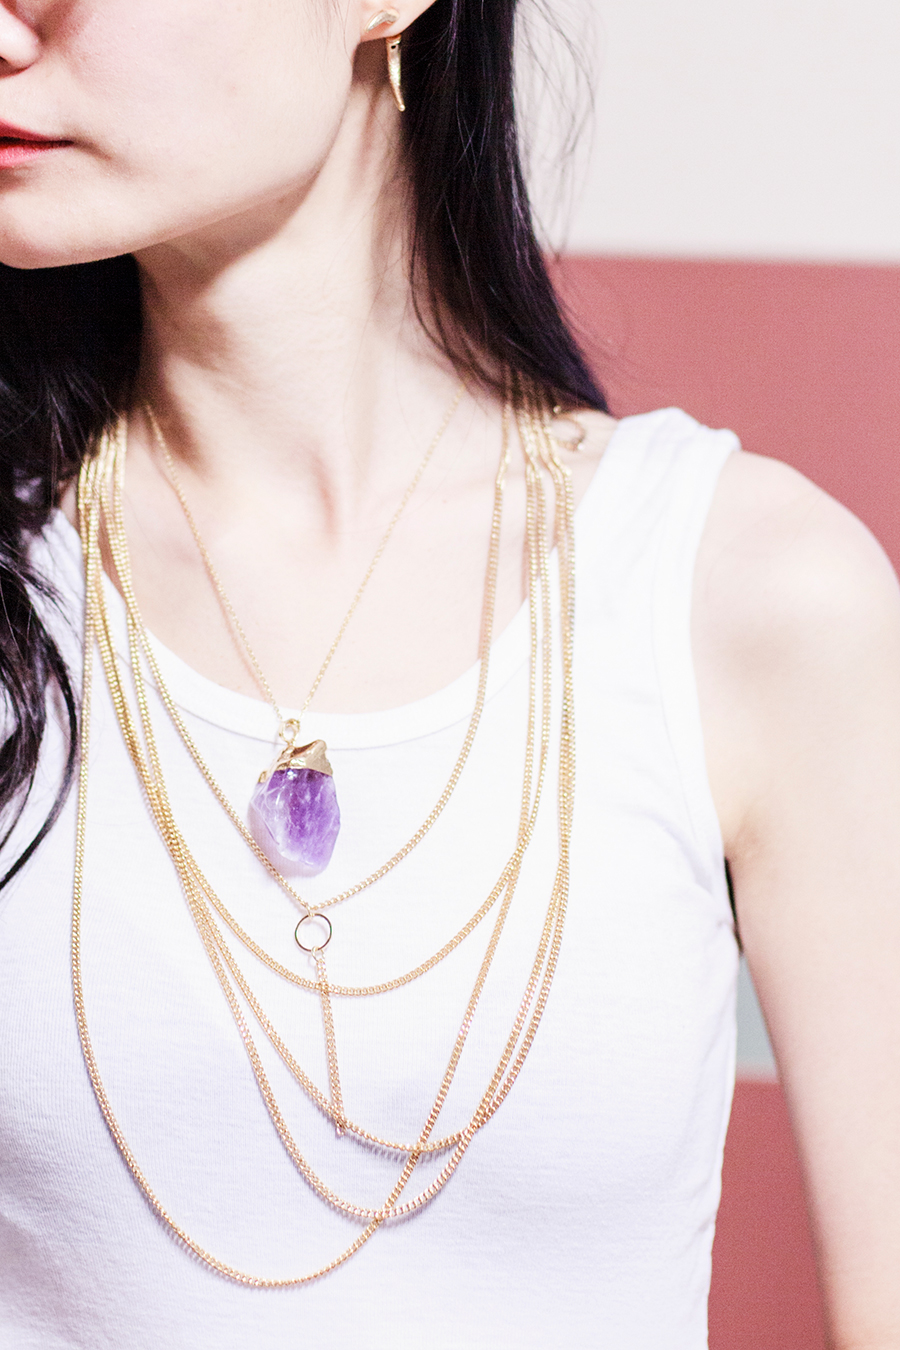 Dealsale amethyst necklace, Topshop gold bodychain as necklace, WholesaleBuying white tank crop top.